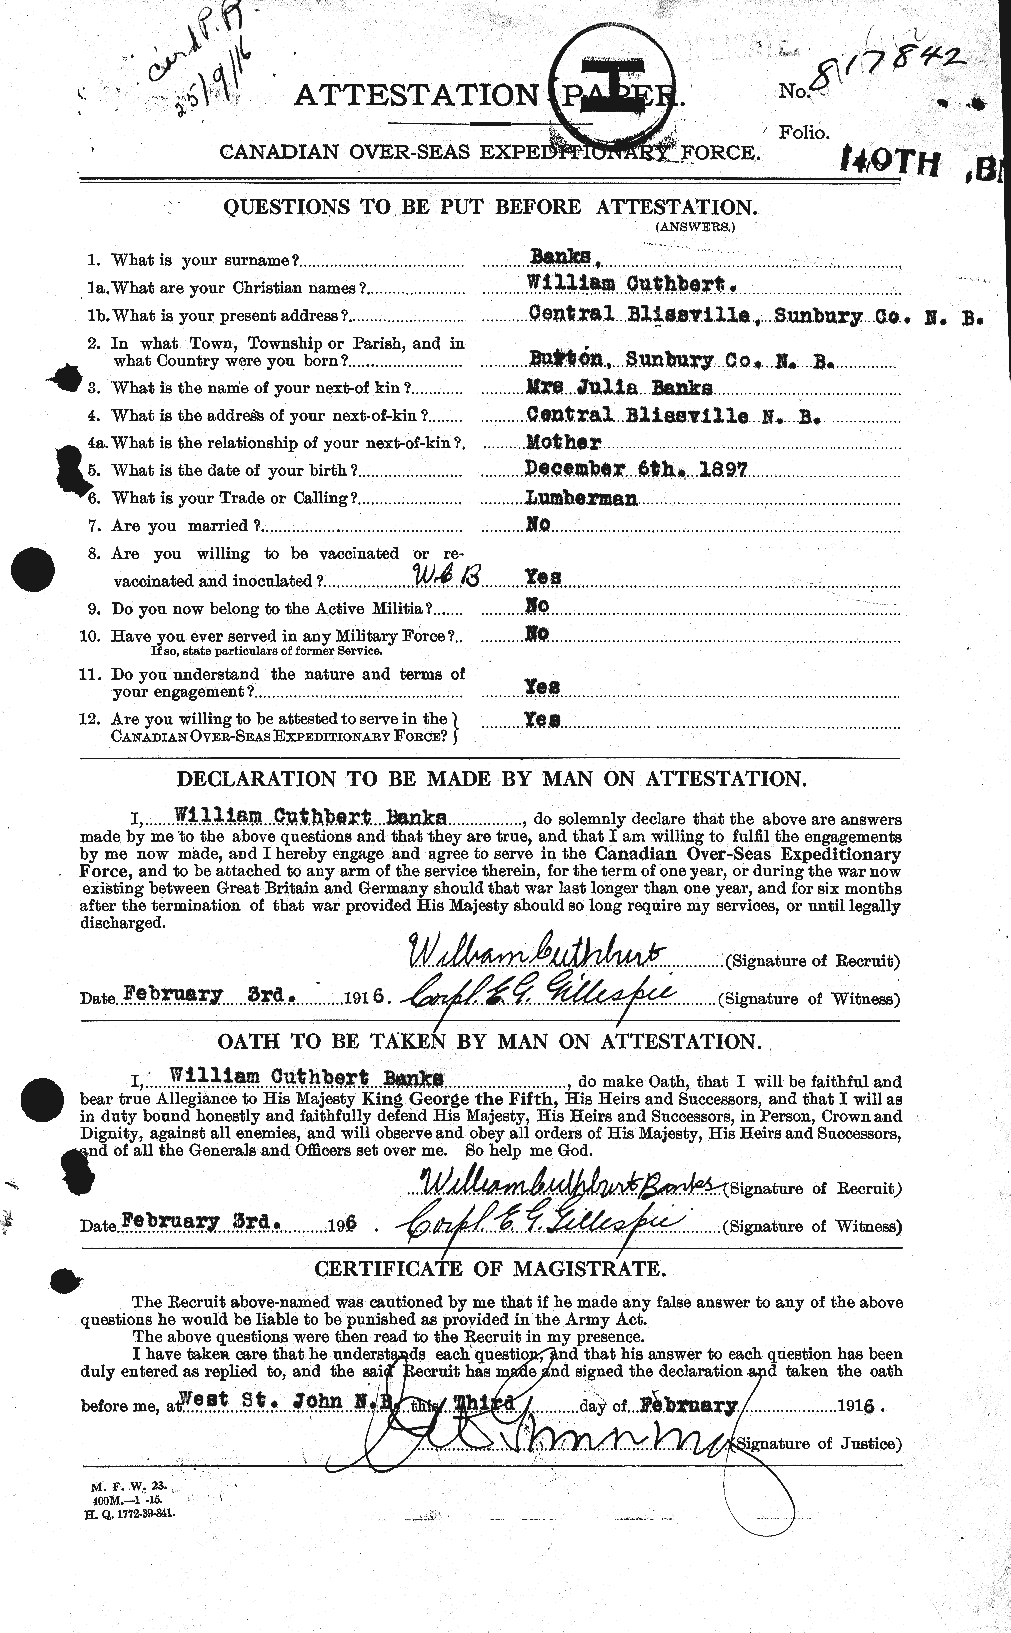 Personnel Records of the First World War - CEF 224921a